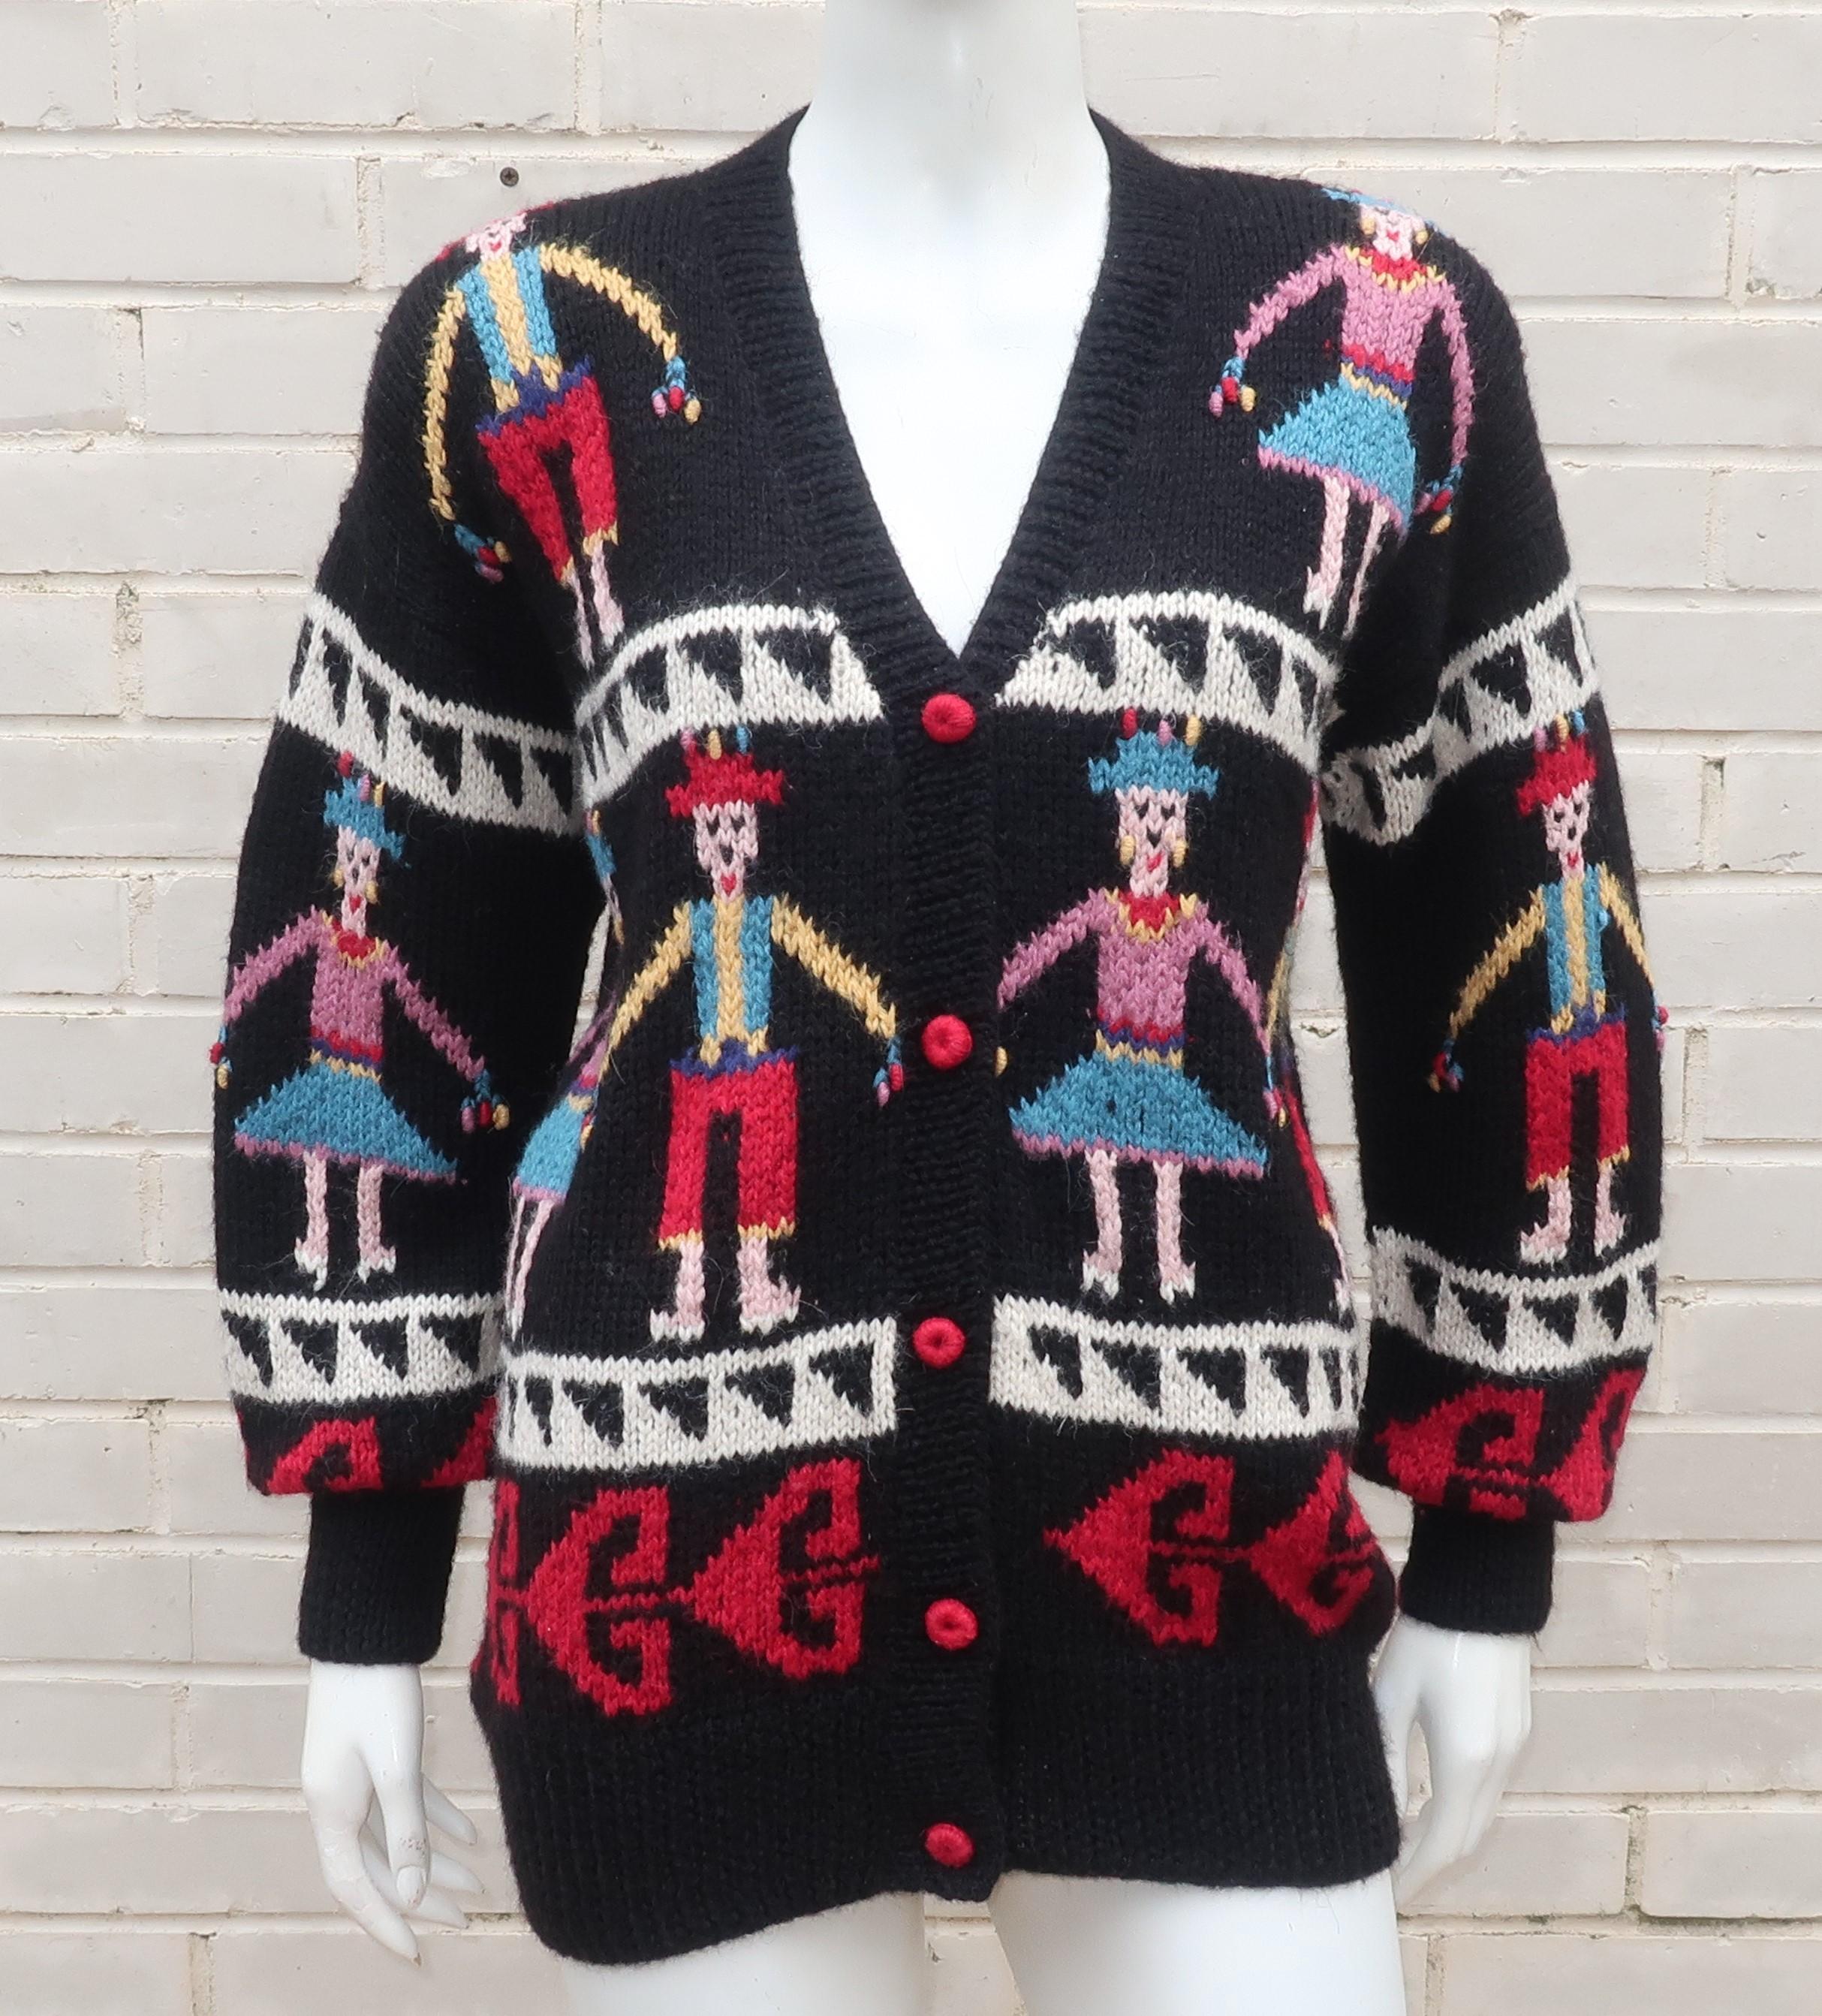 Charming Peruvian hand knit cardigan sweater for Lord & Taylor with folkloric style figures in traditional attire.  The black body of the sweater is accented by vibrant shades of red, yellow, blue, mauve and pink.  The shoulders are enhanced by